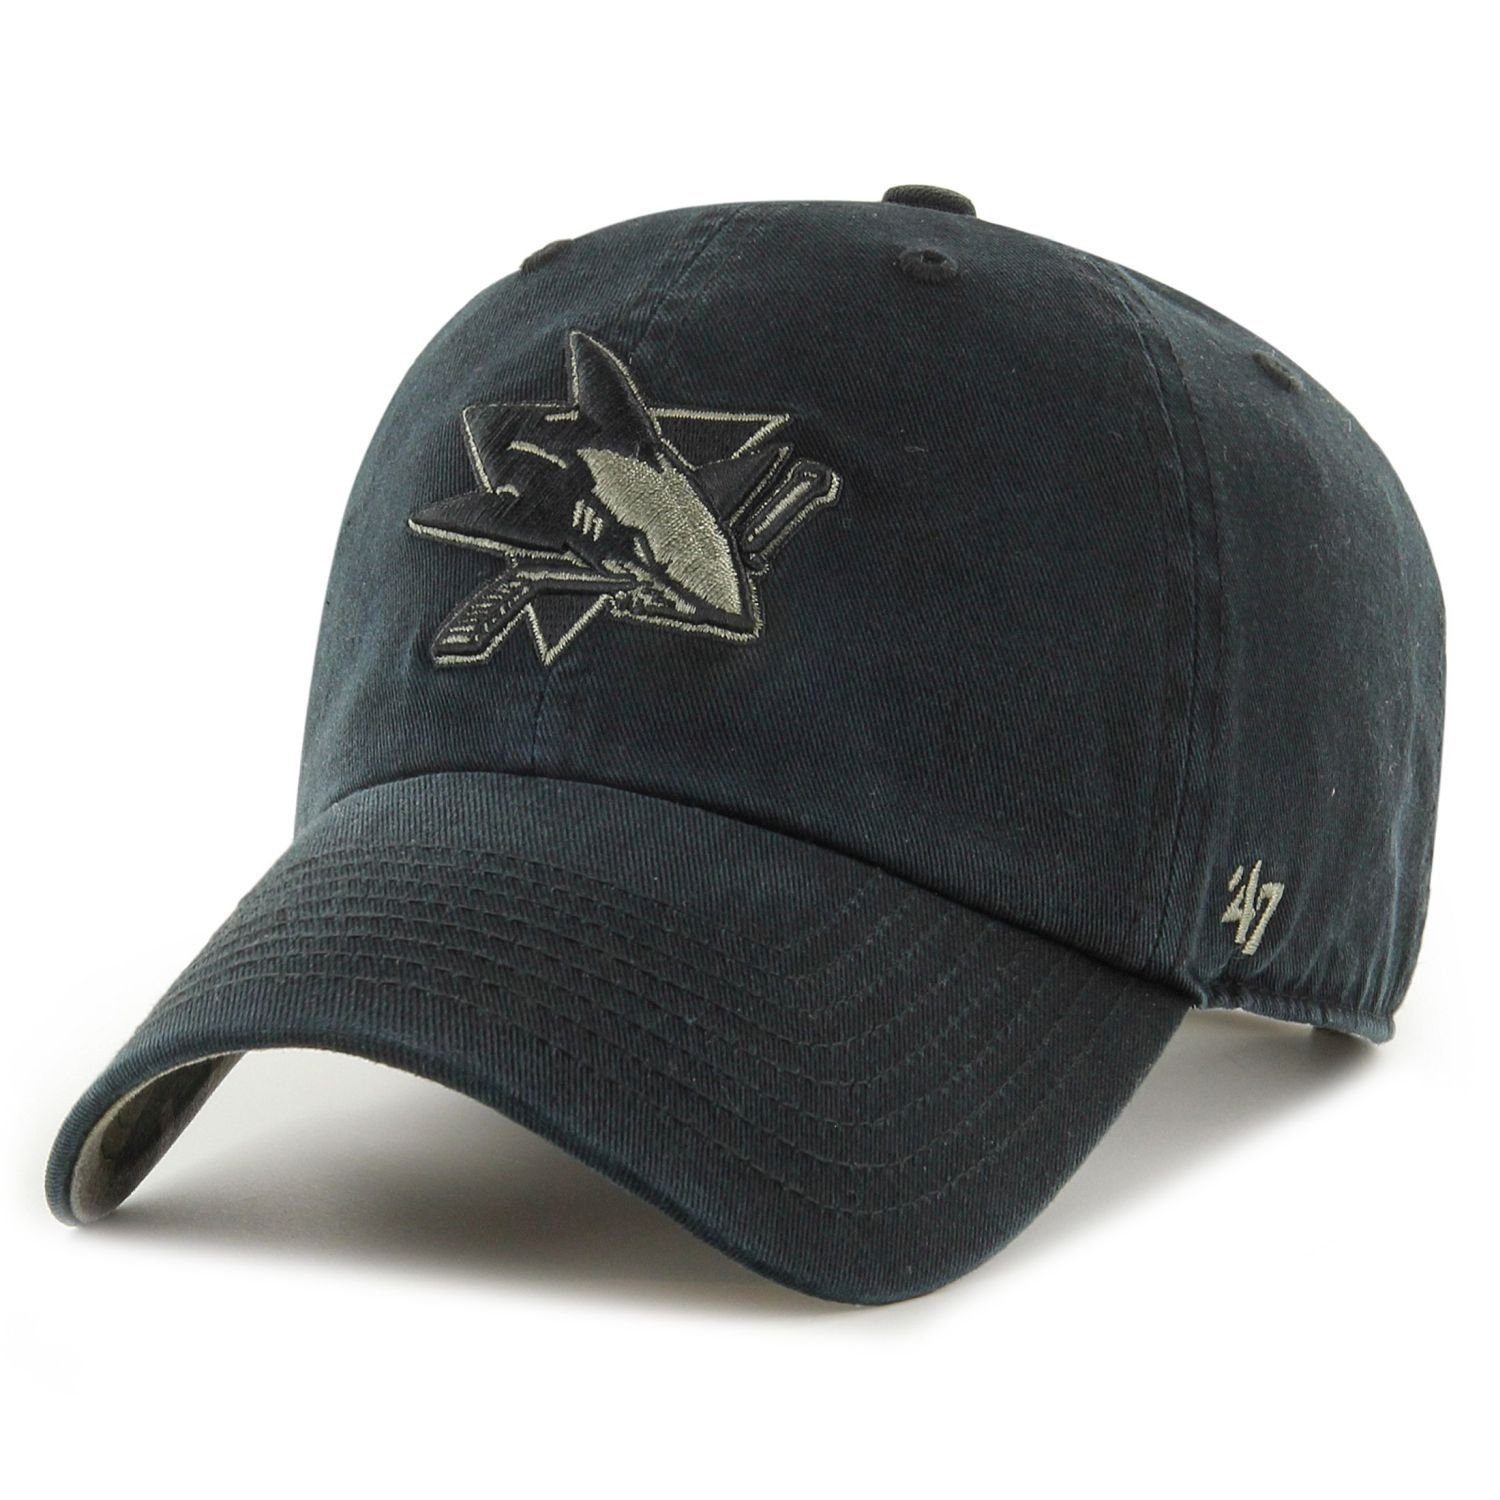 '47 Brand Trucker Cap Relaxed Fit CLEAN UP San Jose Sharks